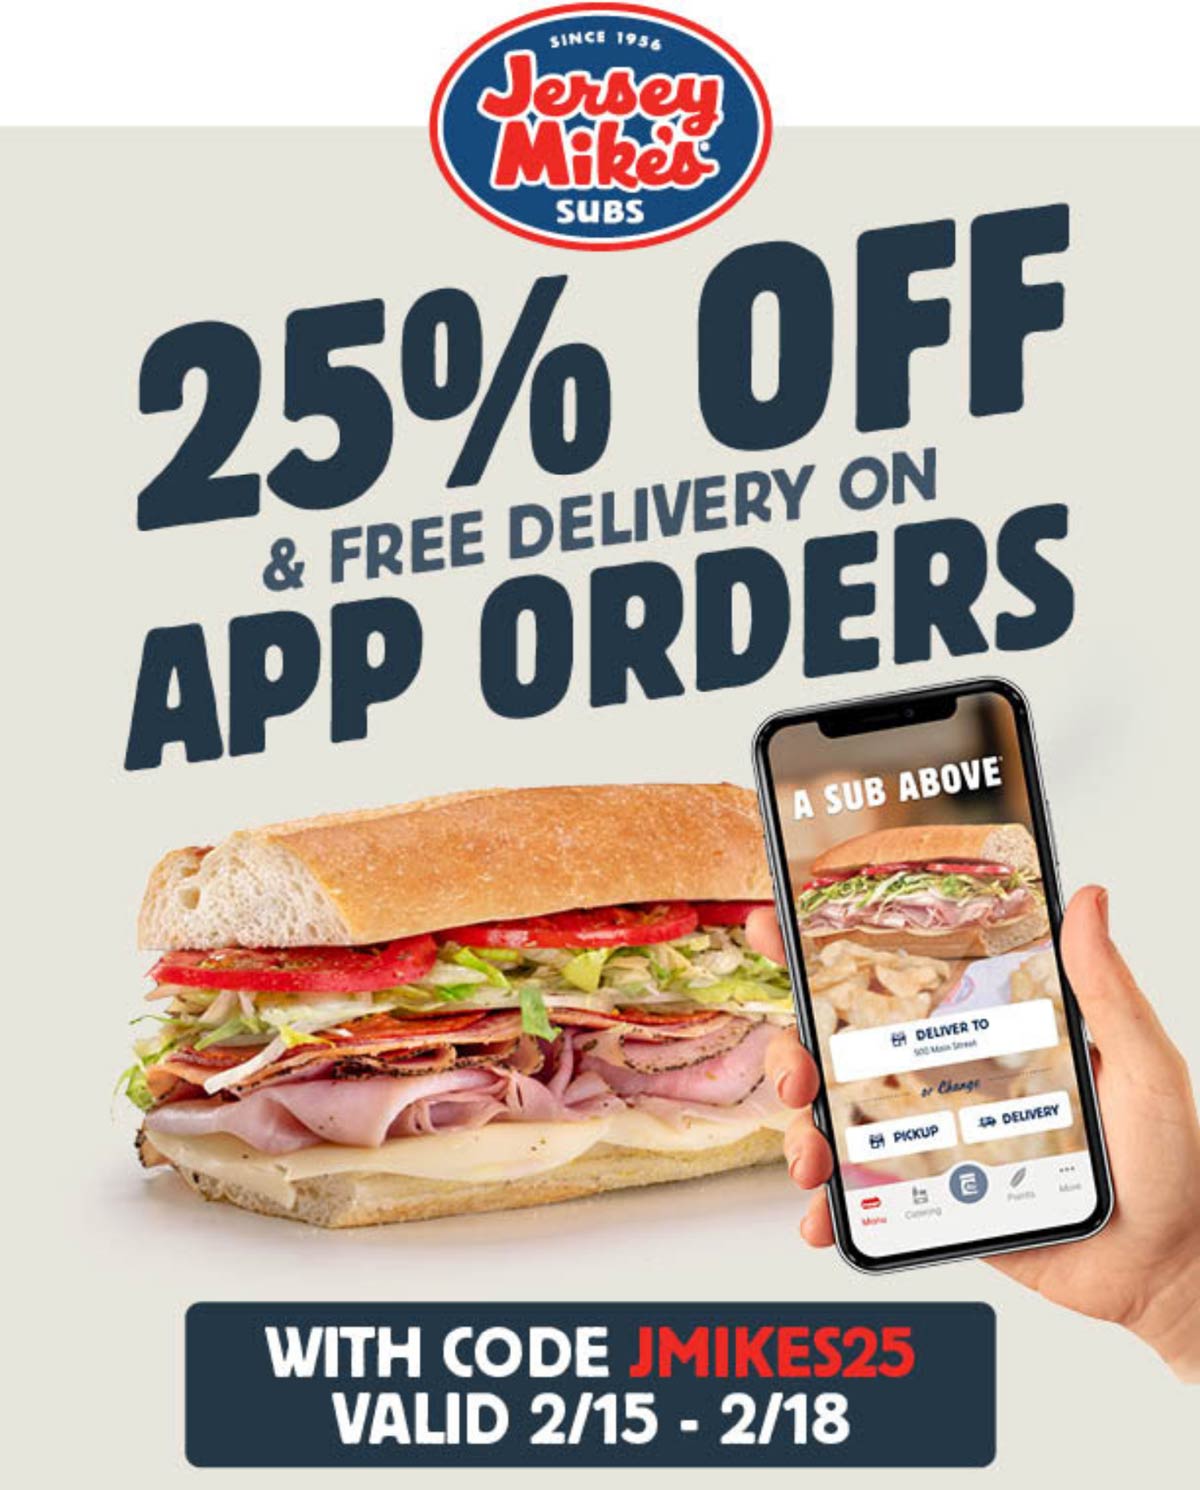 25 off + free delivery at Jersey Mikes via promo code JMIKES25 